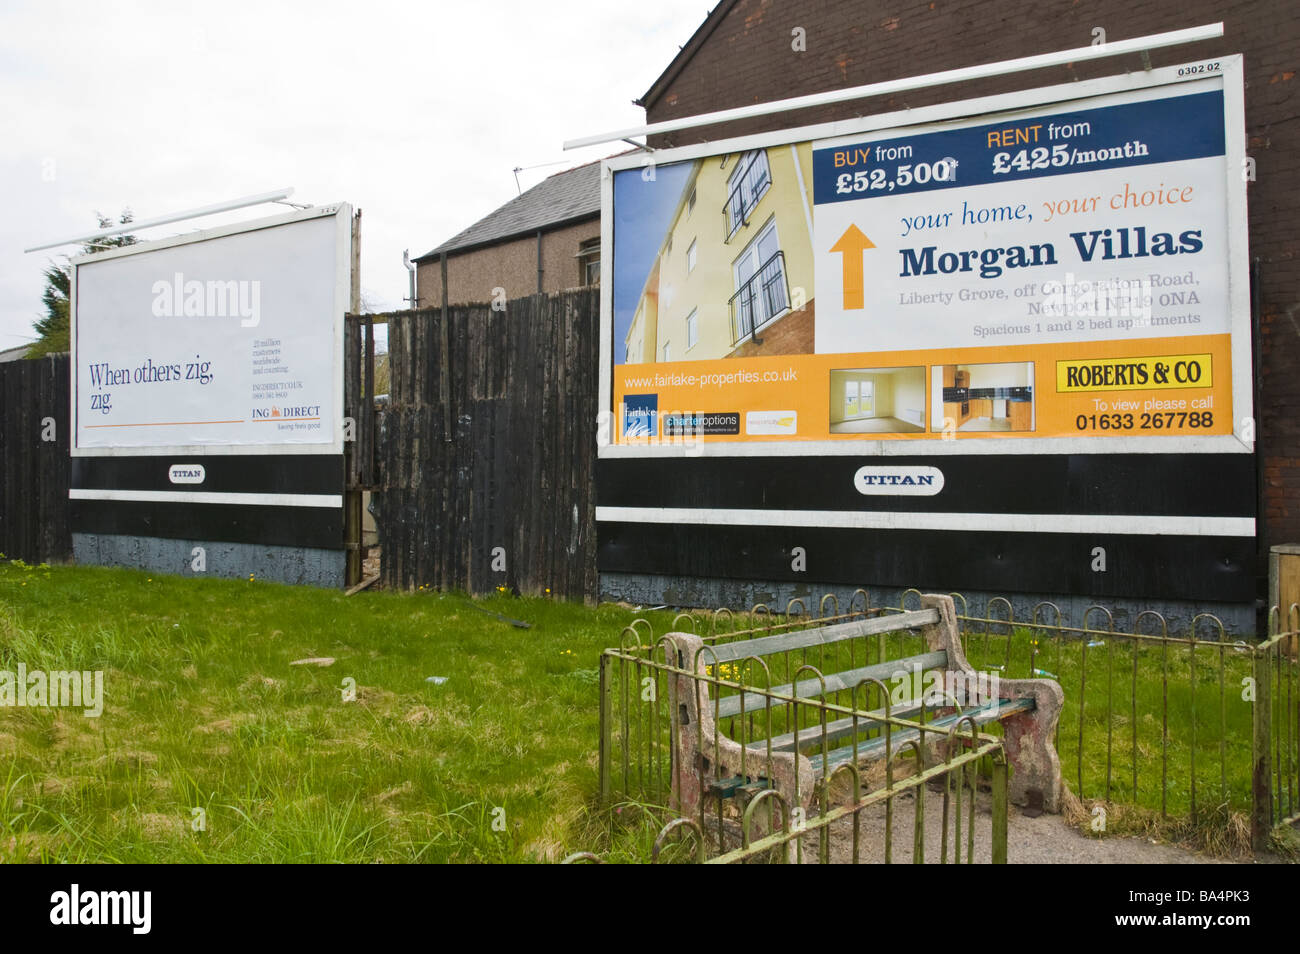 Advertising billboards for ING DIRECT and local house sales on hoardings overlooking small park area in Newport South Wales UK Stock Photo